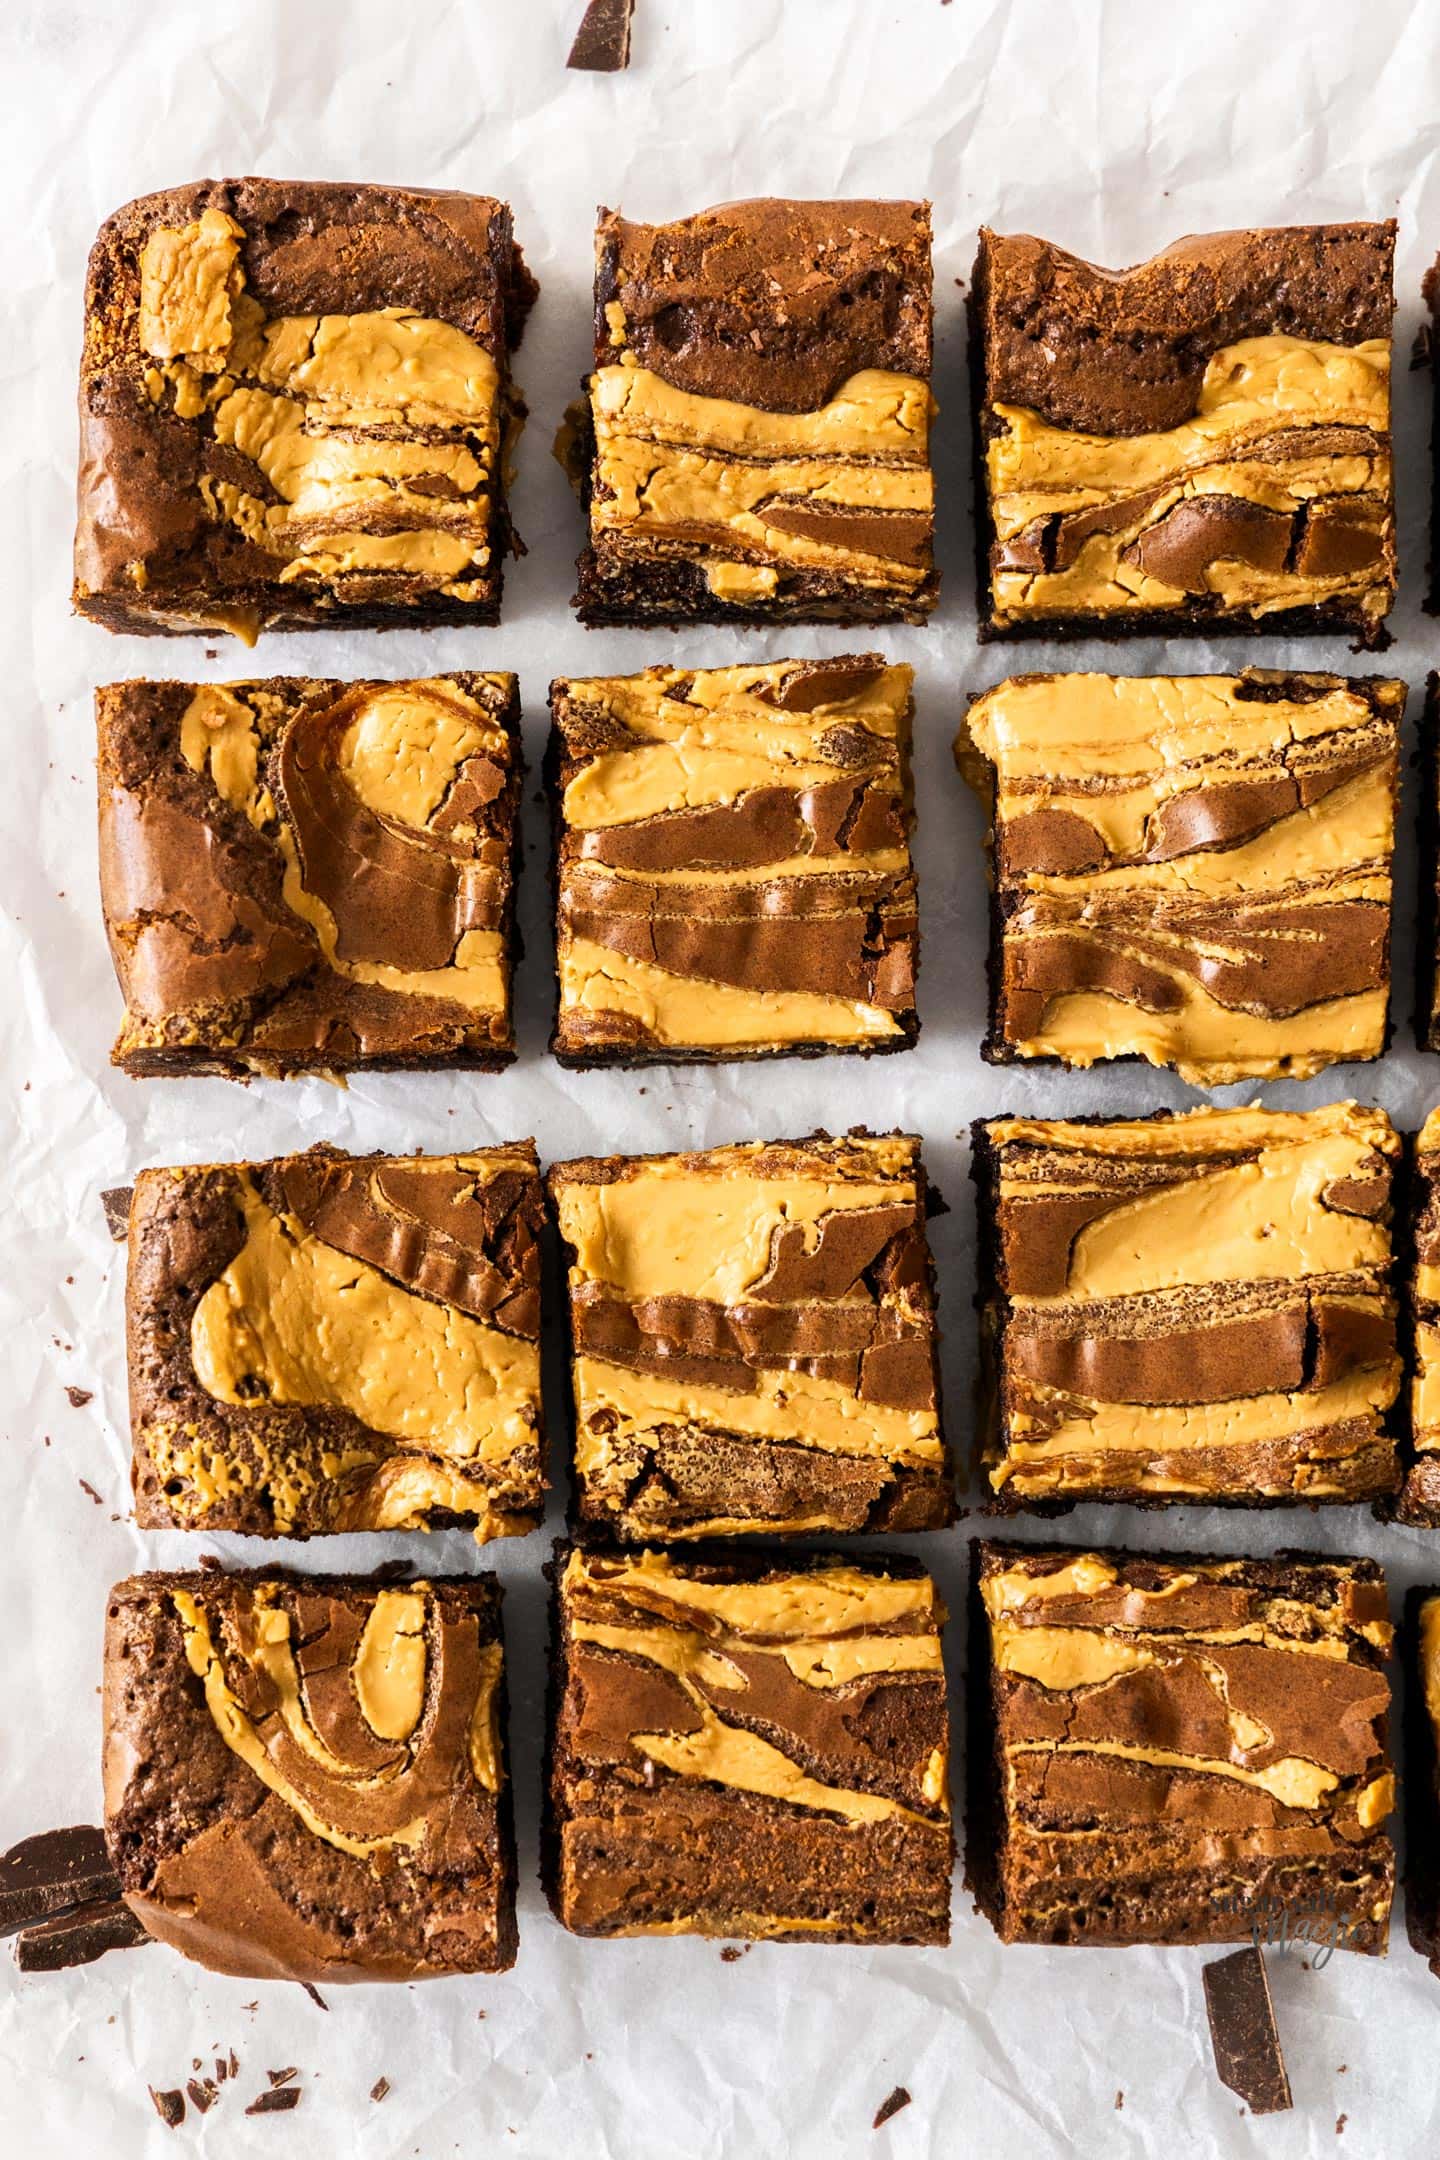 Top down view of 12 brownie squares.